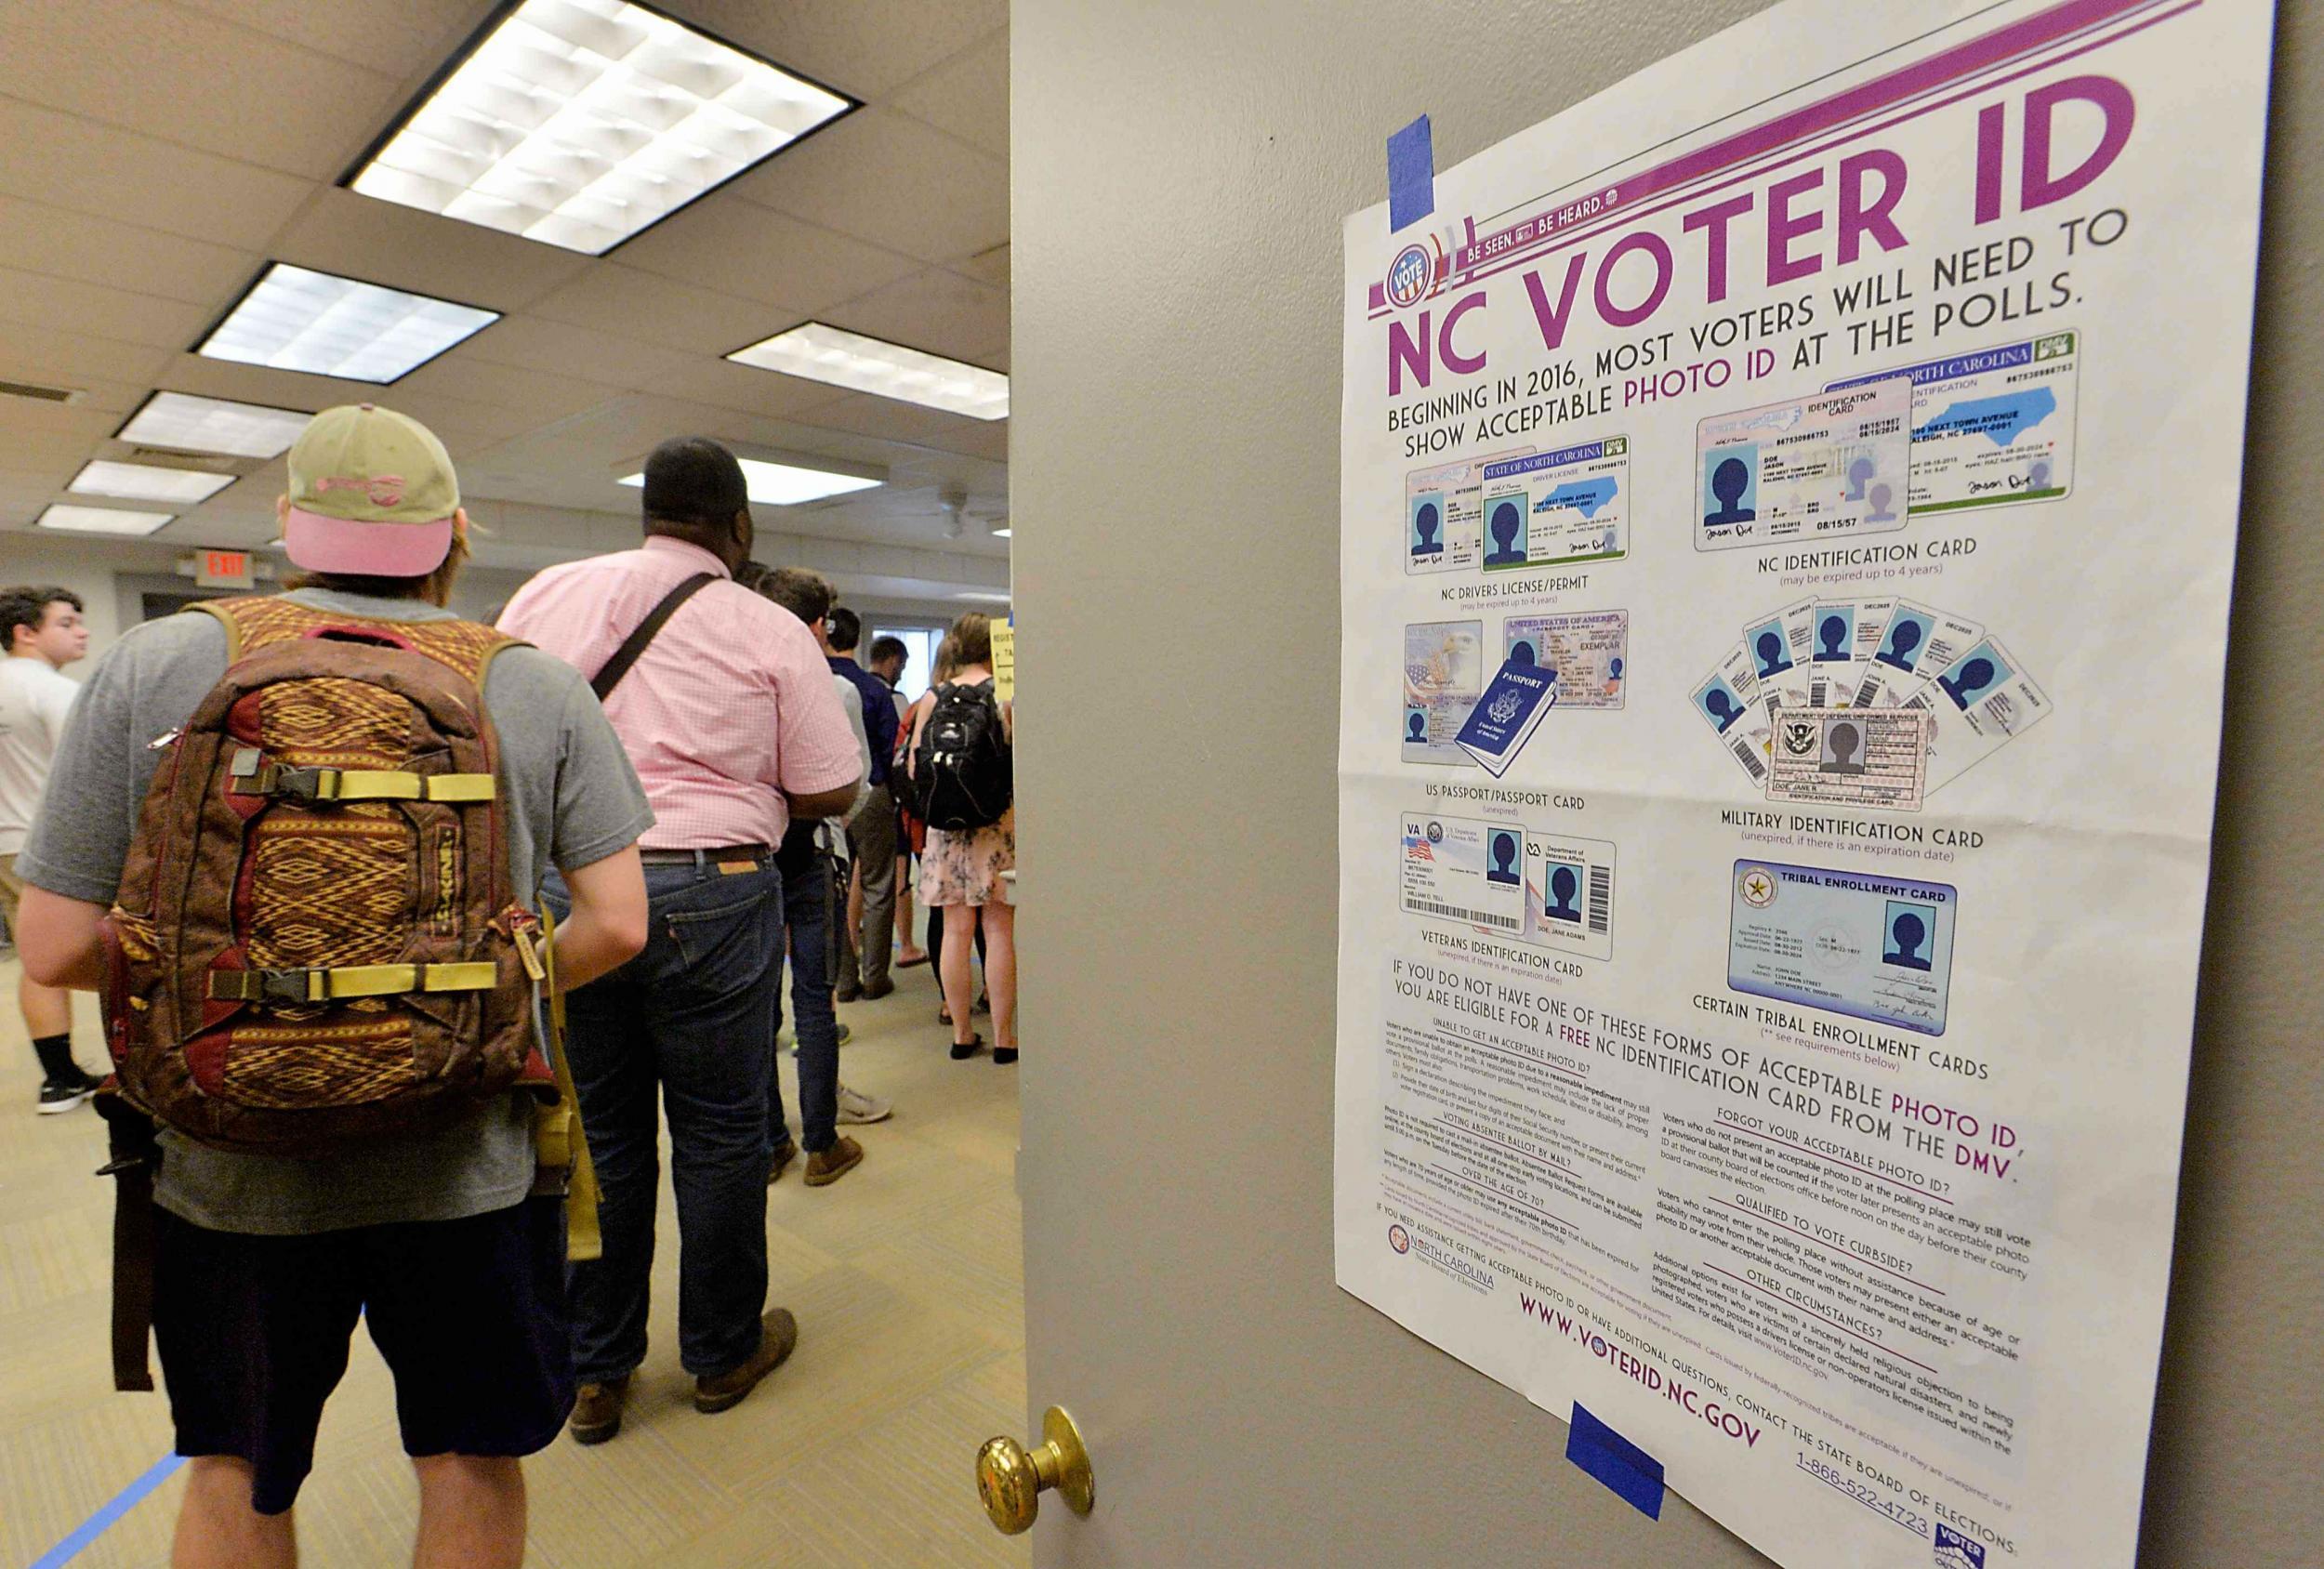 The rules in North Carolina must now change